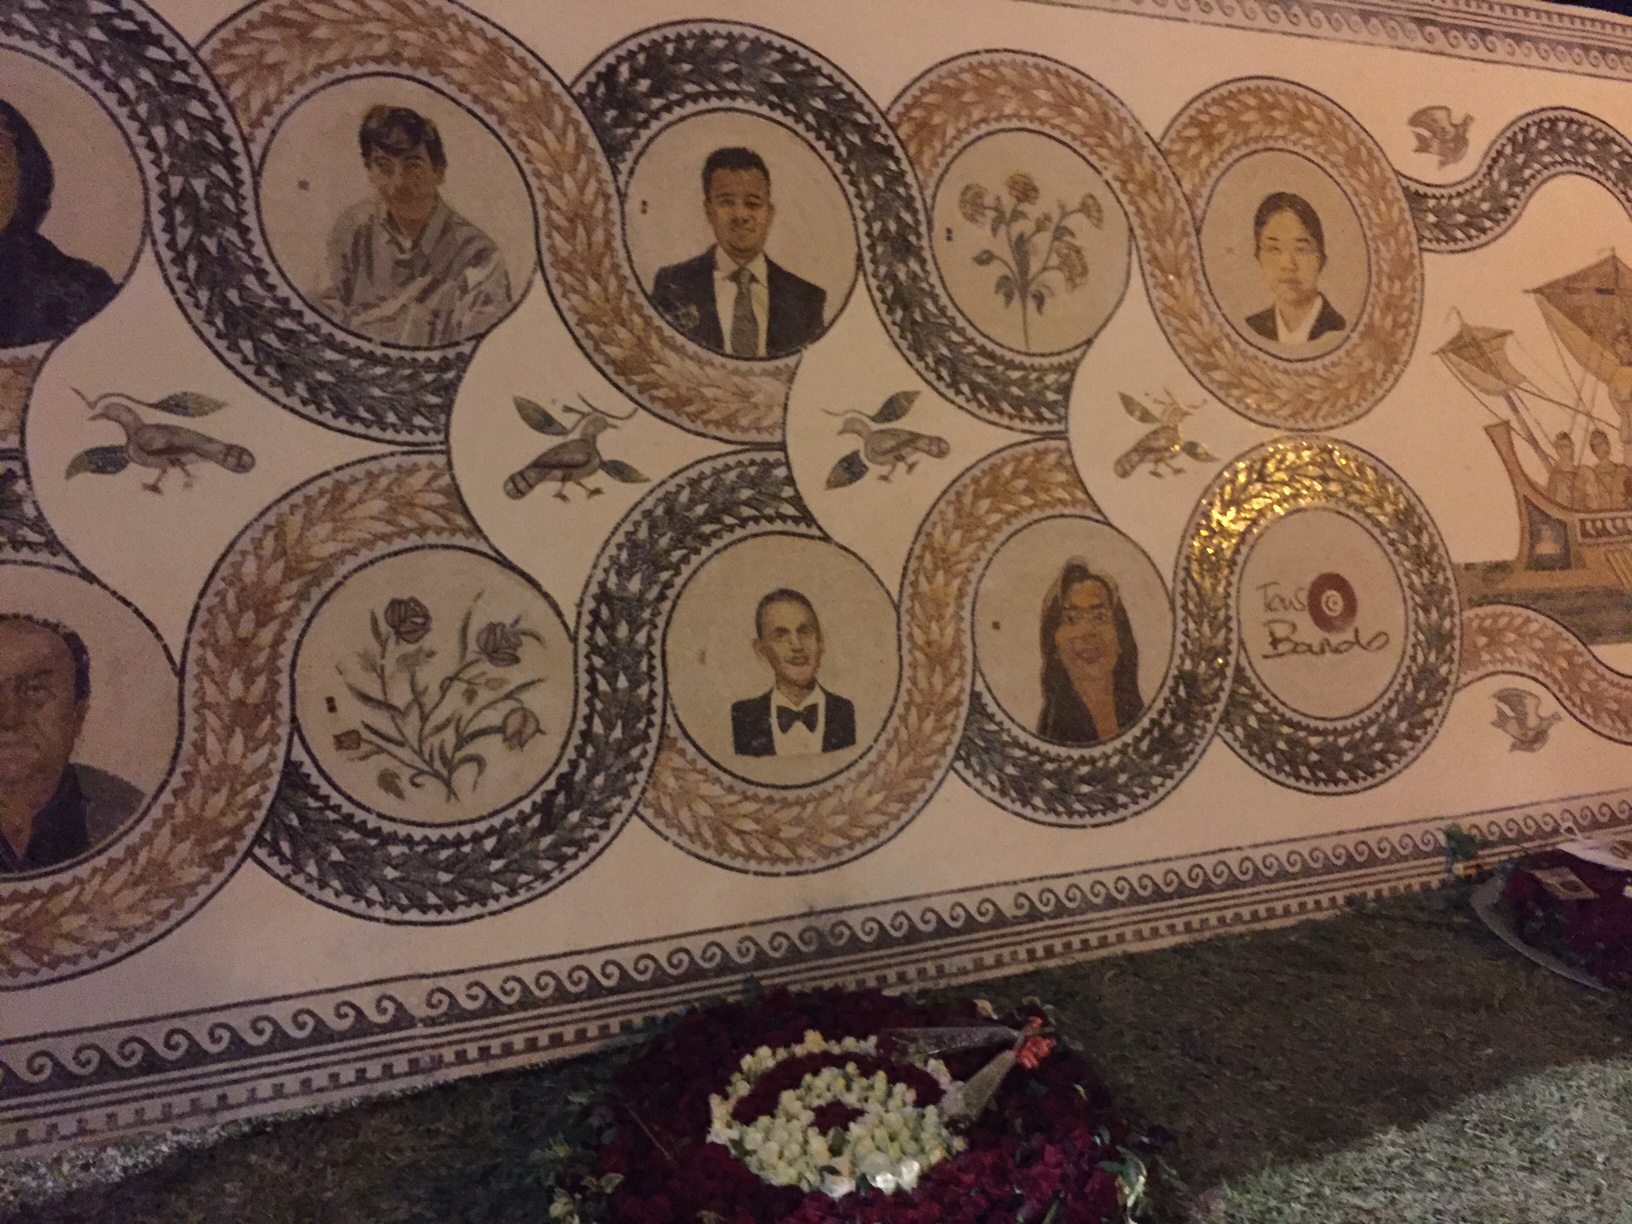 Commemorative mosaic outside the Bardo Museum in Tunis, which was attacked by terrorists in March 2015